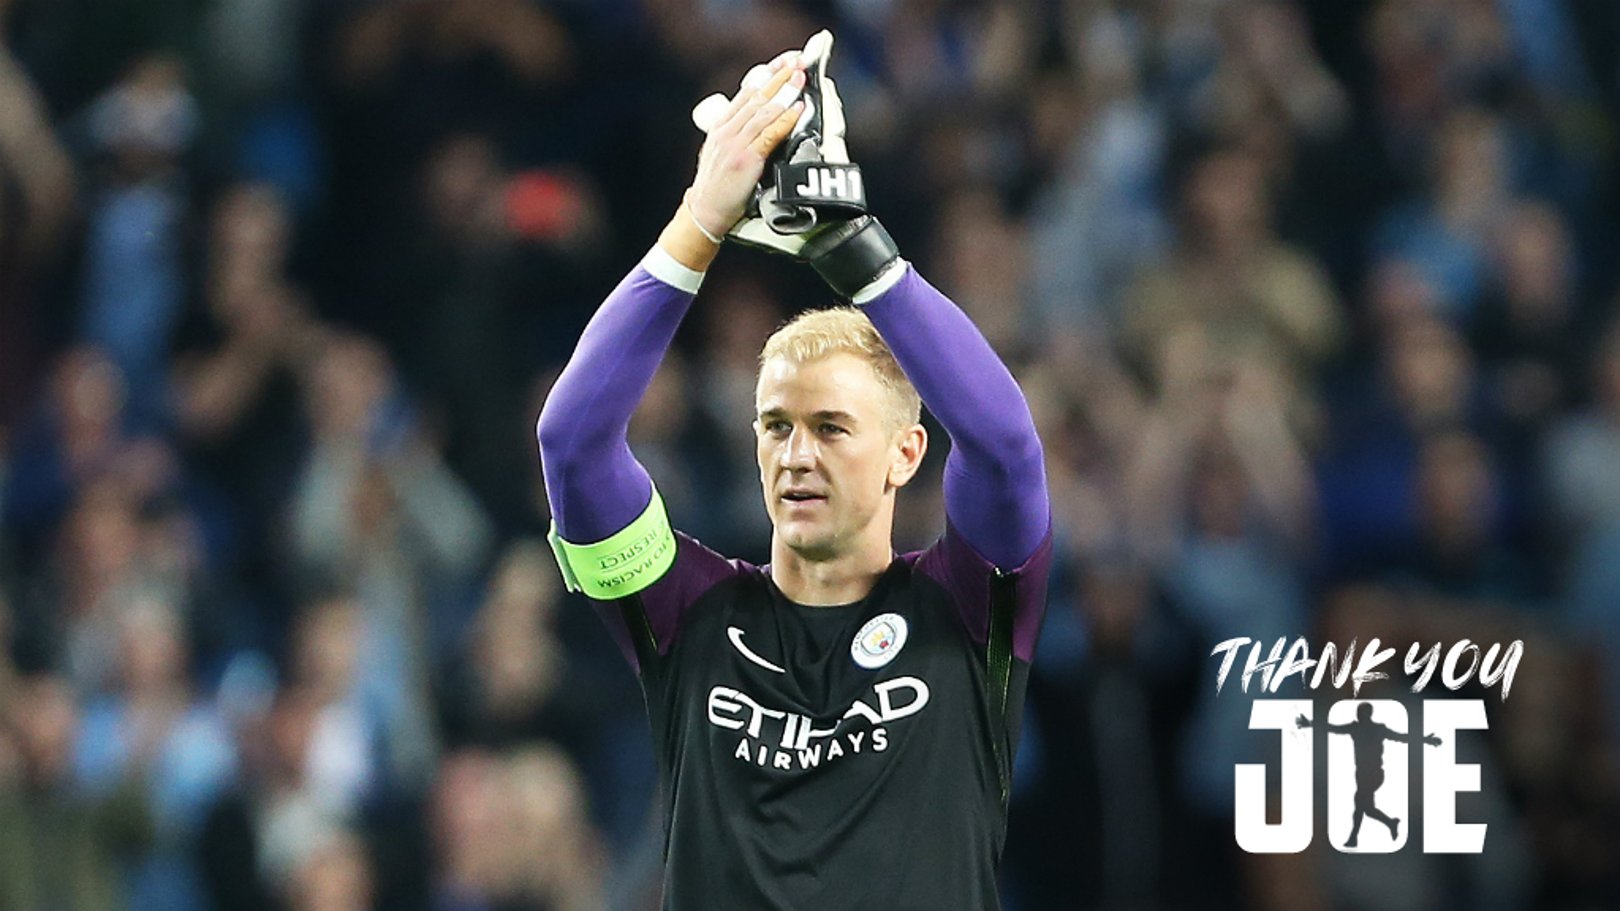 THANK YOU, JOE: In total, Joe Hart played 348 times for the Blues, leaving behind some wonderful memories